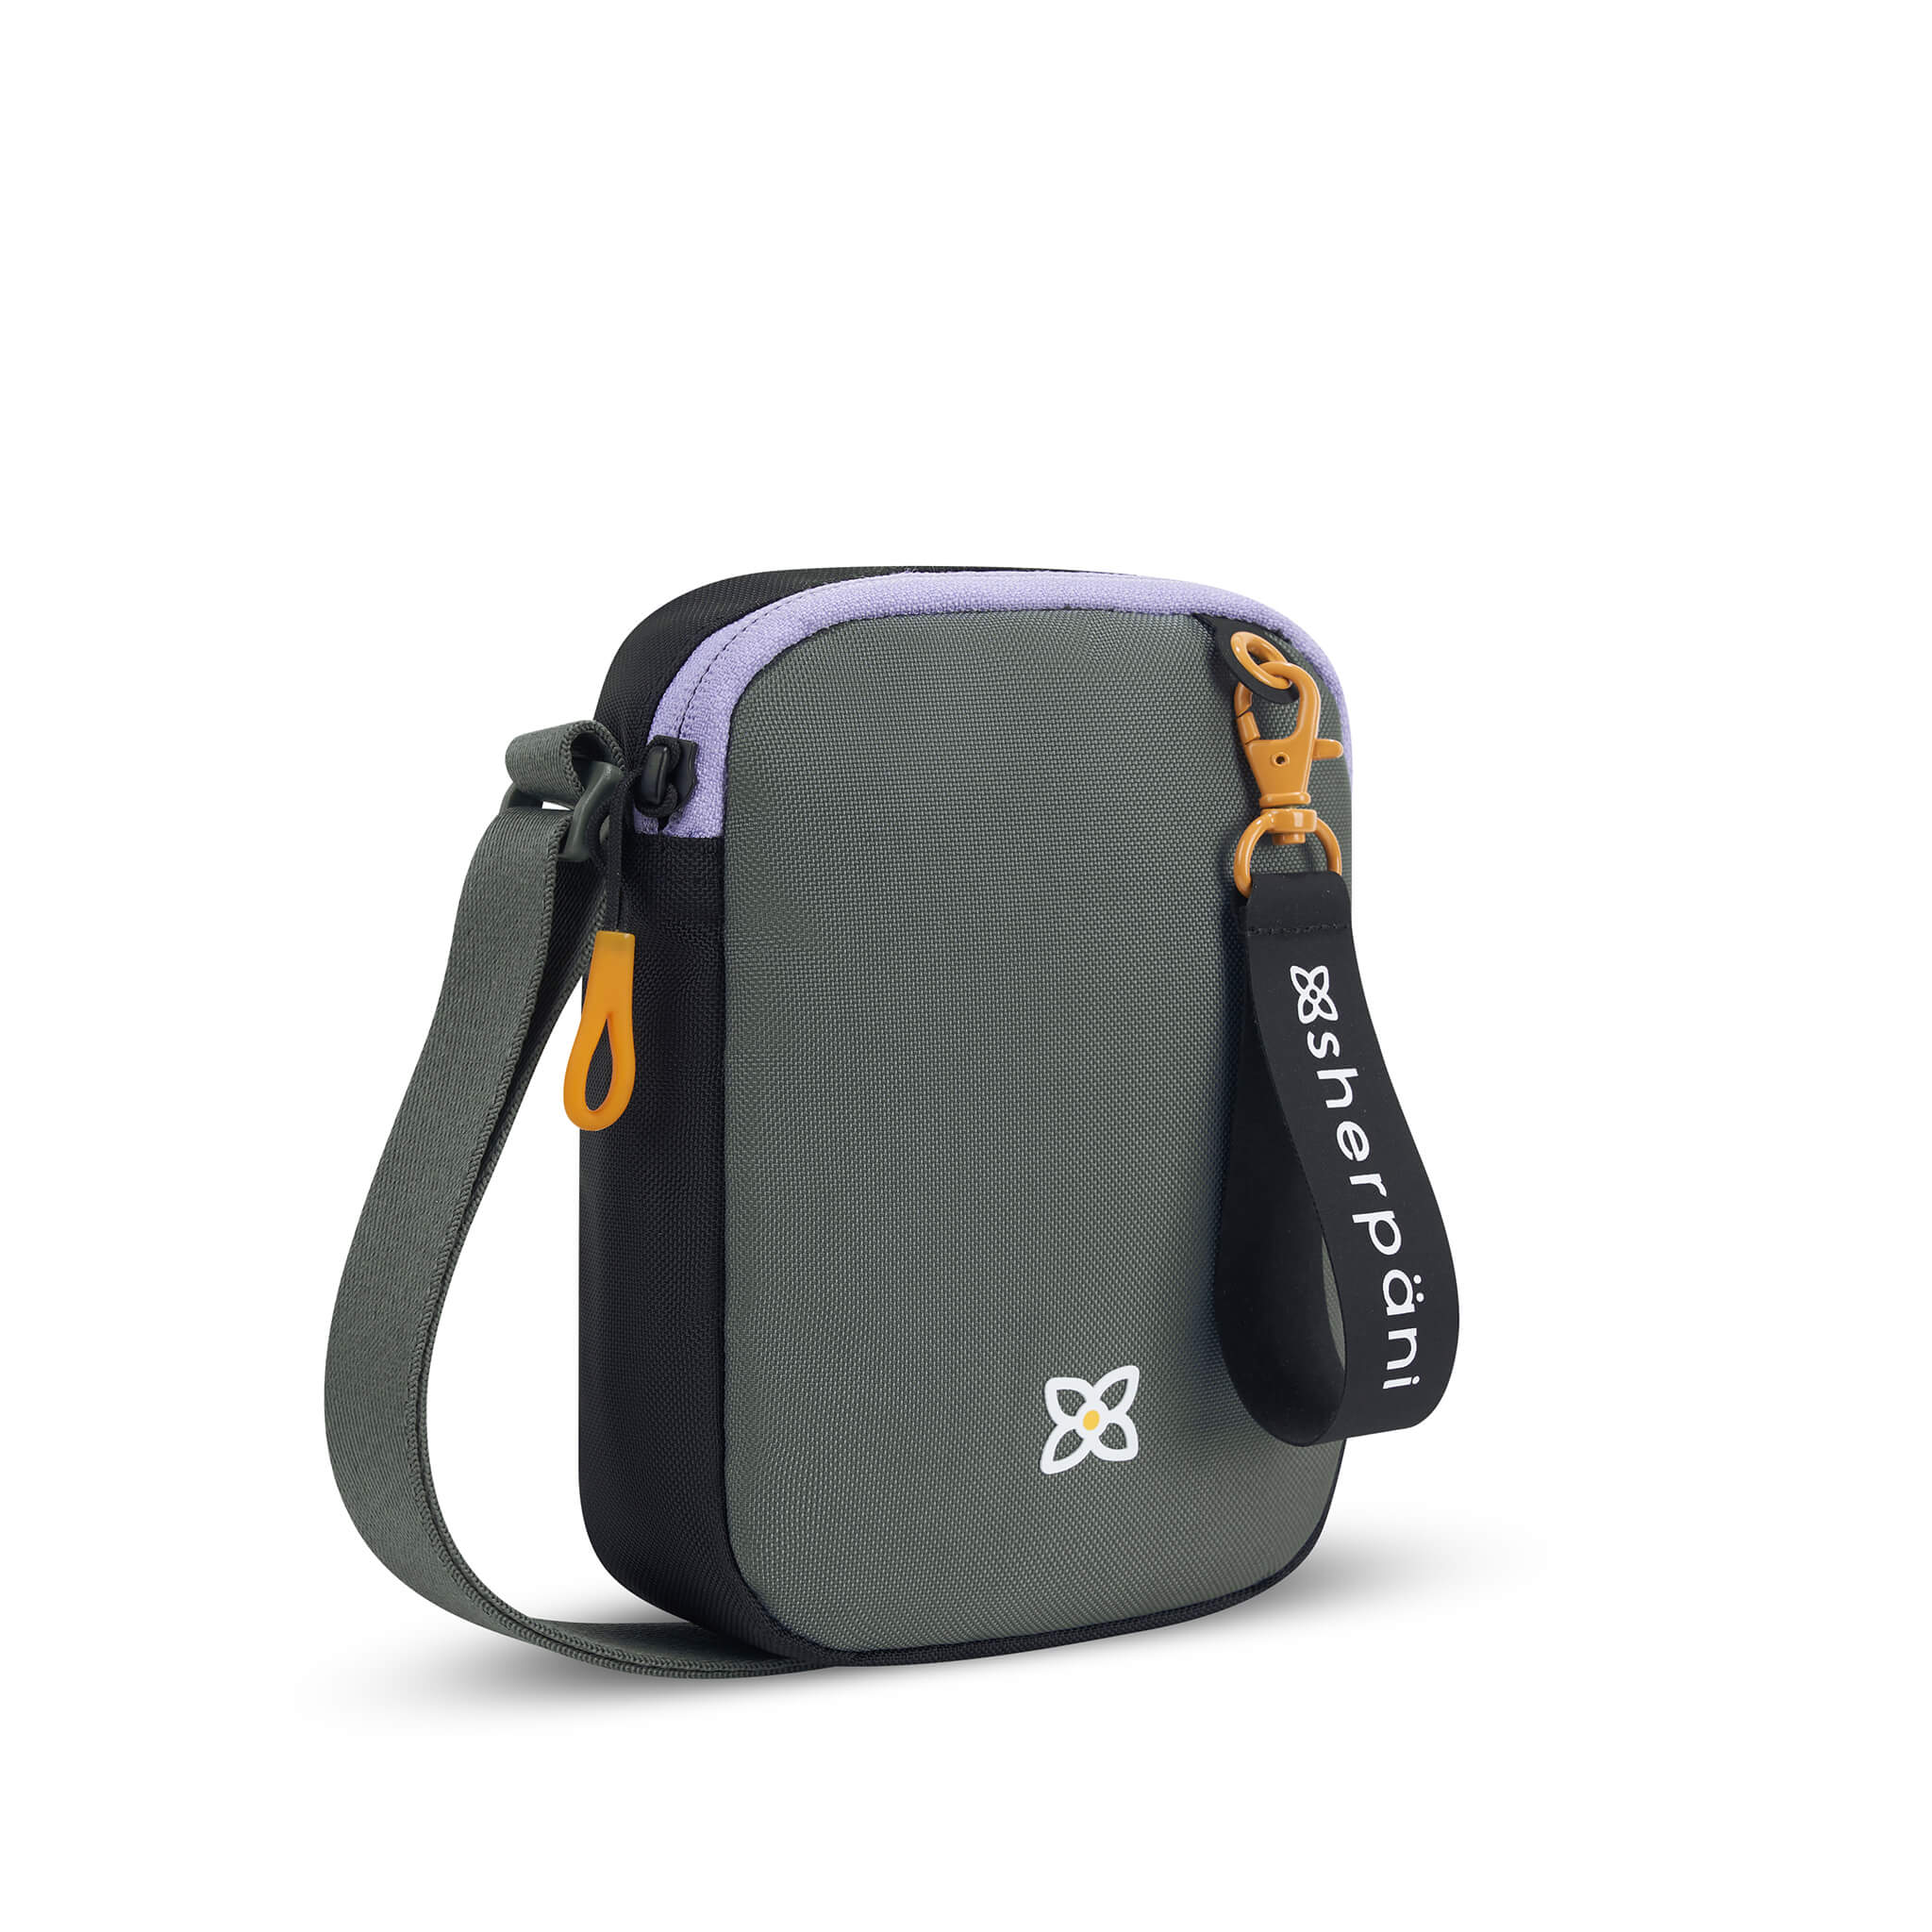 Angled front view of Sherpani mini crossbody purse, the Rogue in Juniper. Rogue features include an adjustable crossbody strap, detachable keychain, compact design, minimalist bag, RFID protection and back slip pocket. The Juniper color is two-toned in black and gray with yellow accents.